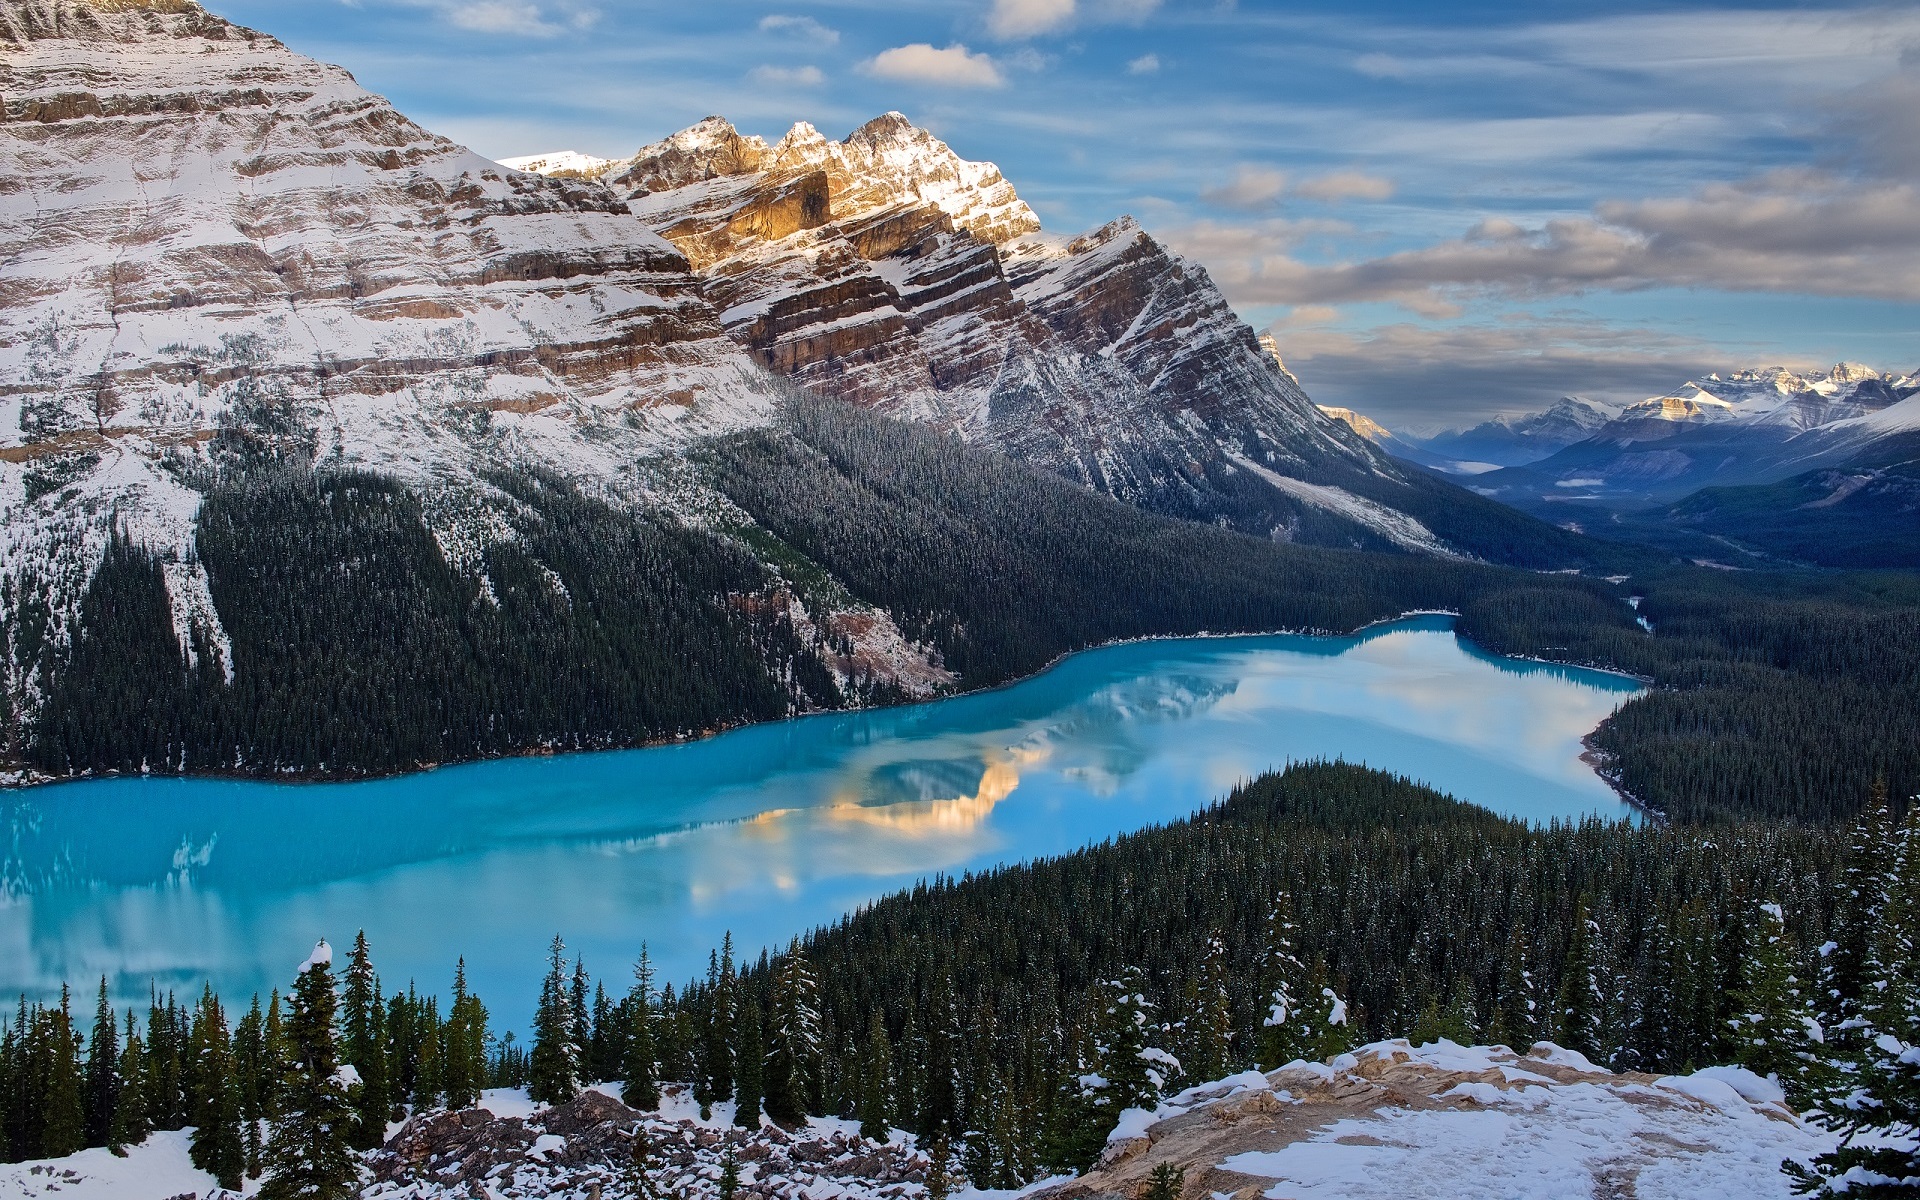 Peyto Lake Canada Nature Landscape Mountains Snowy Mountain Lake Turquoise Forest Trees Snowy Peak S 1920x1200